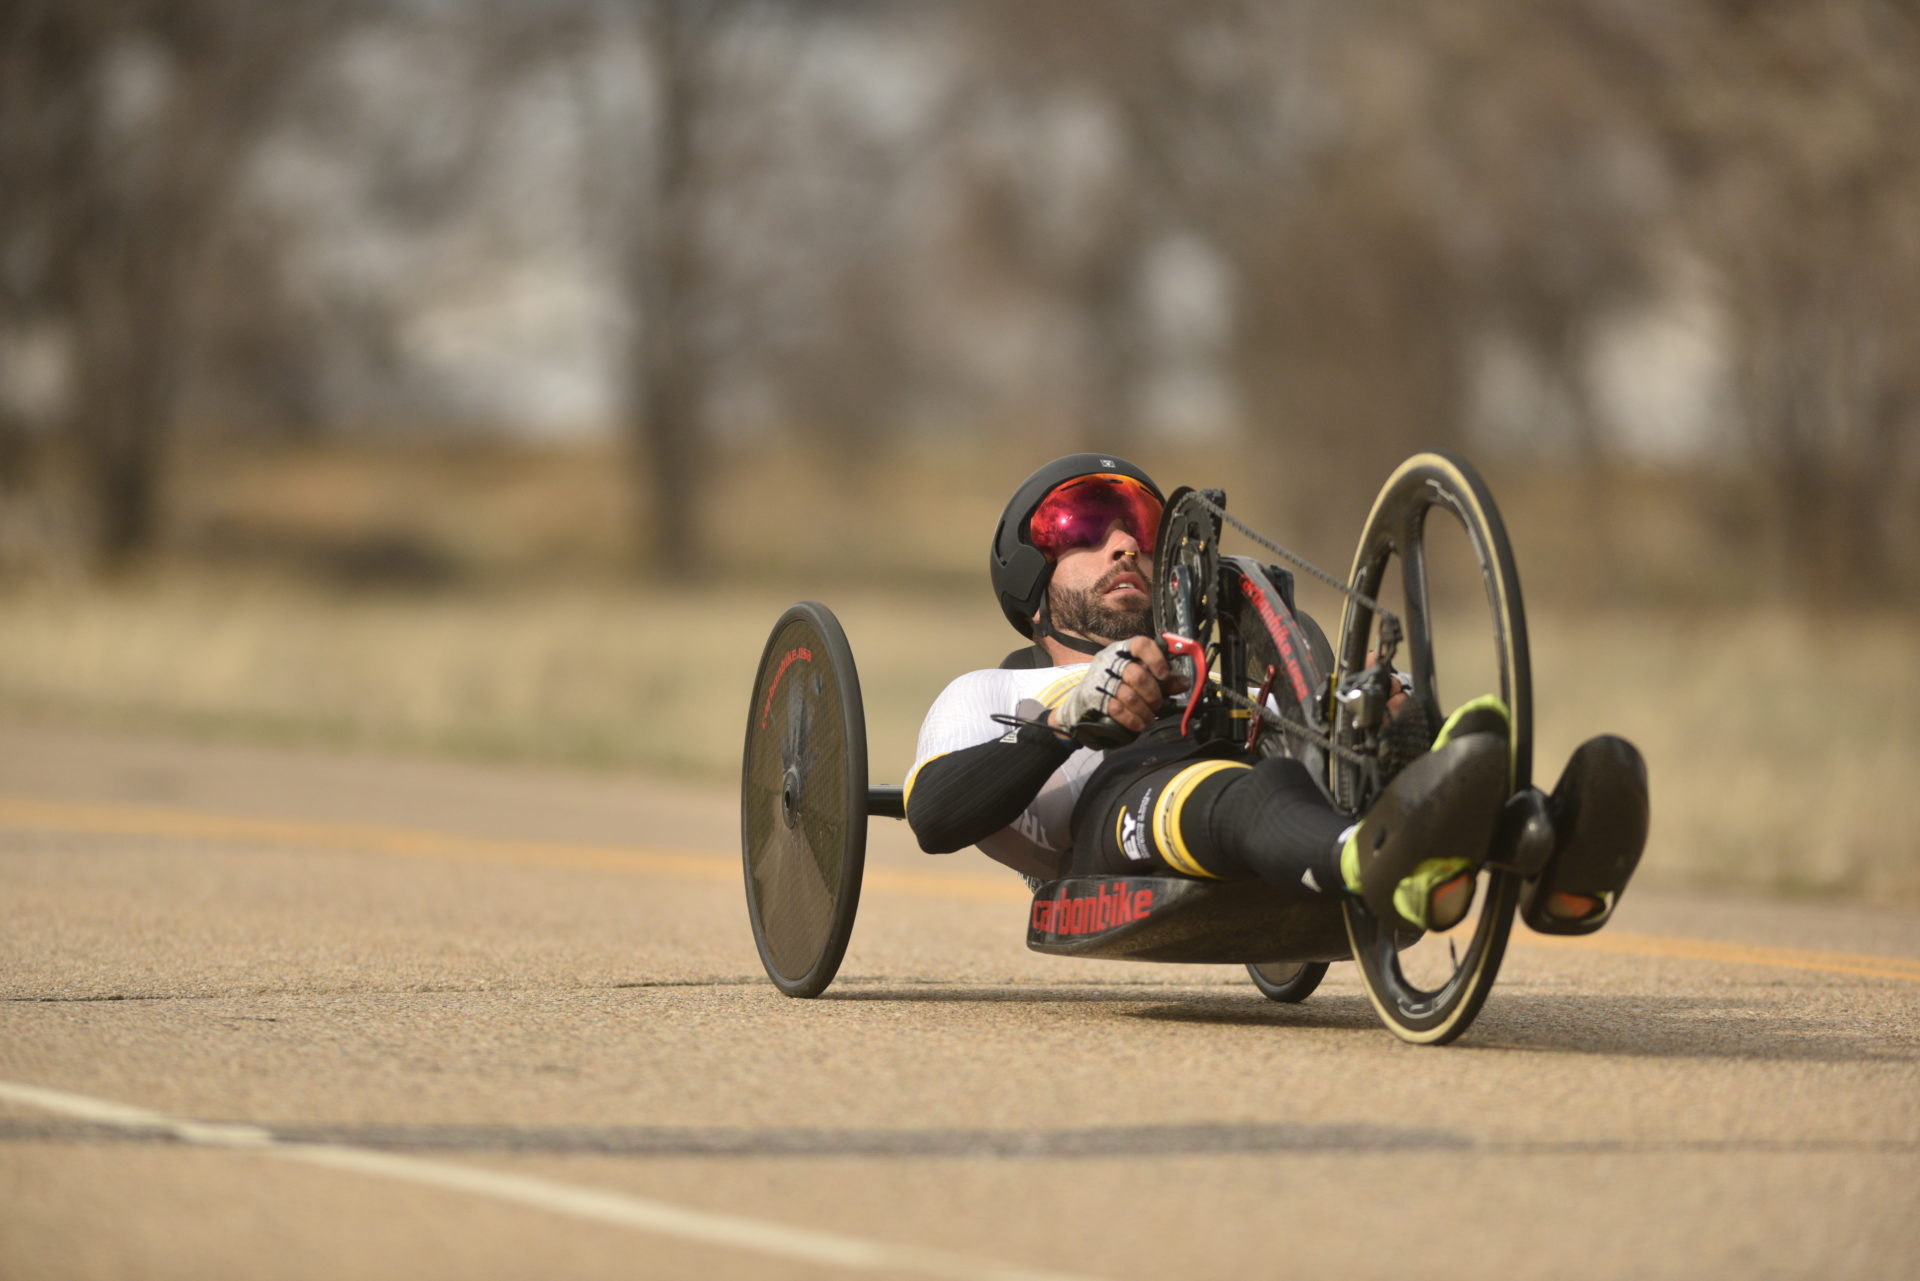 A person riding a flat recumbent trike on a paved road toward the bottom right of the frame.